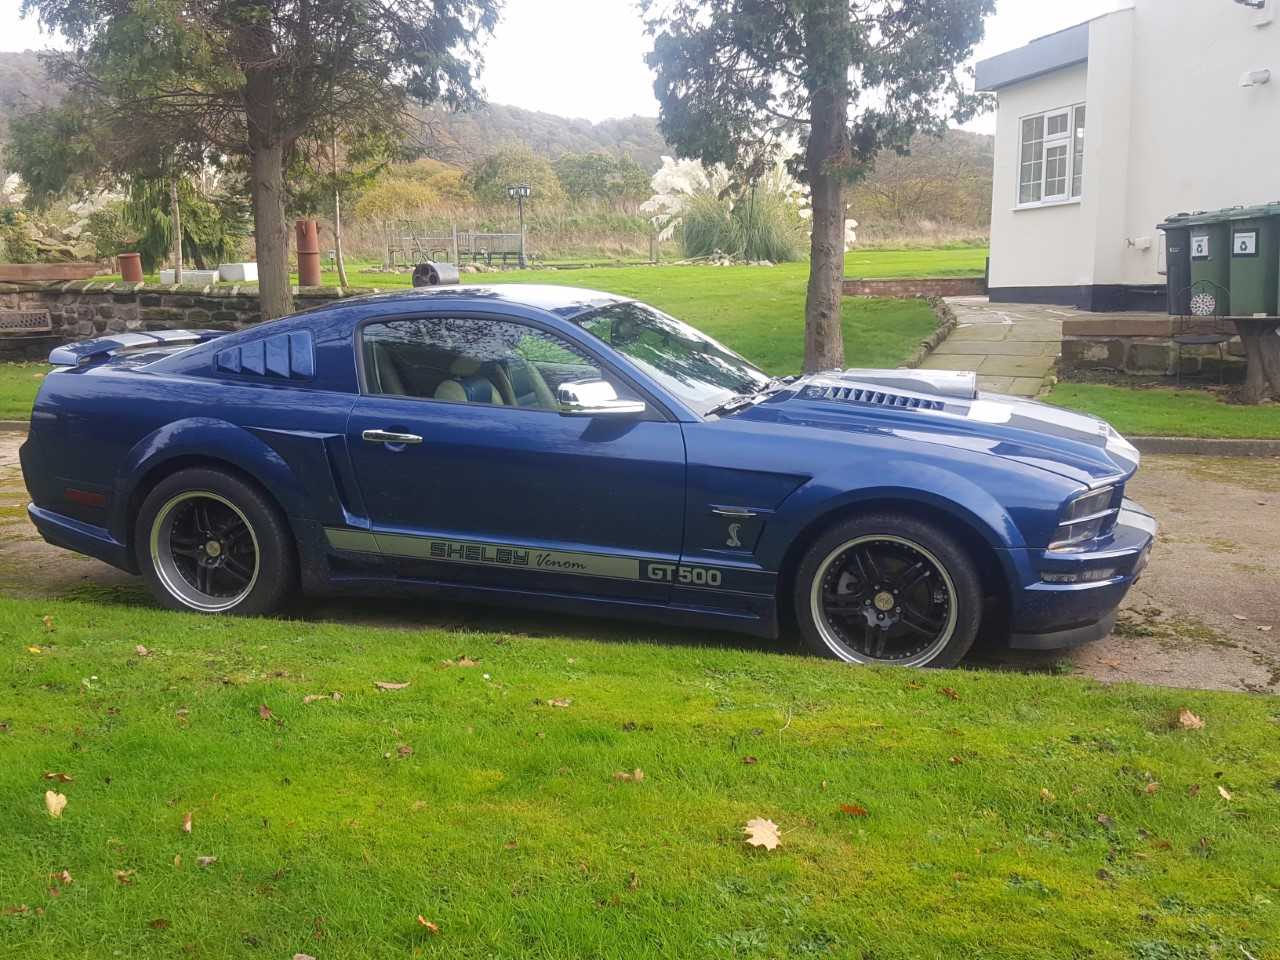 2005 Ford Mustang Shelby GT500 replica